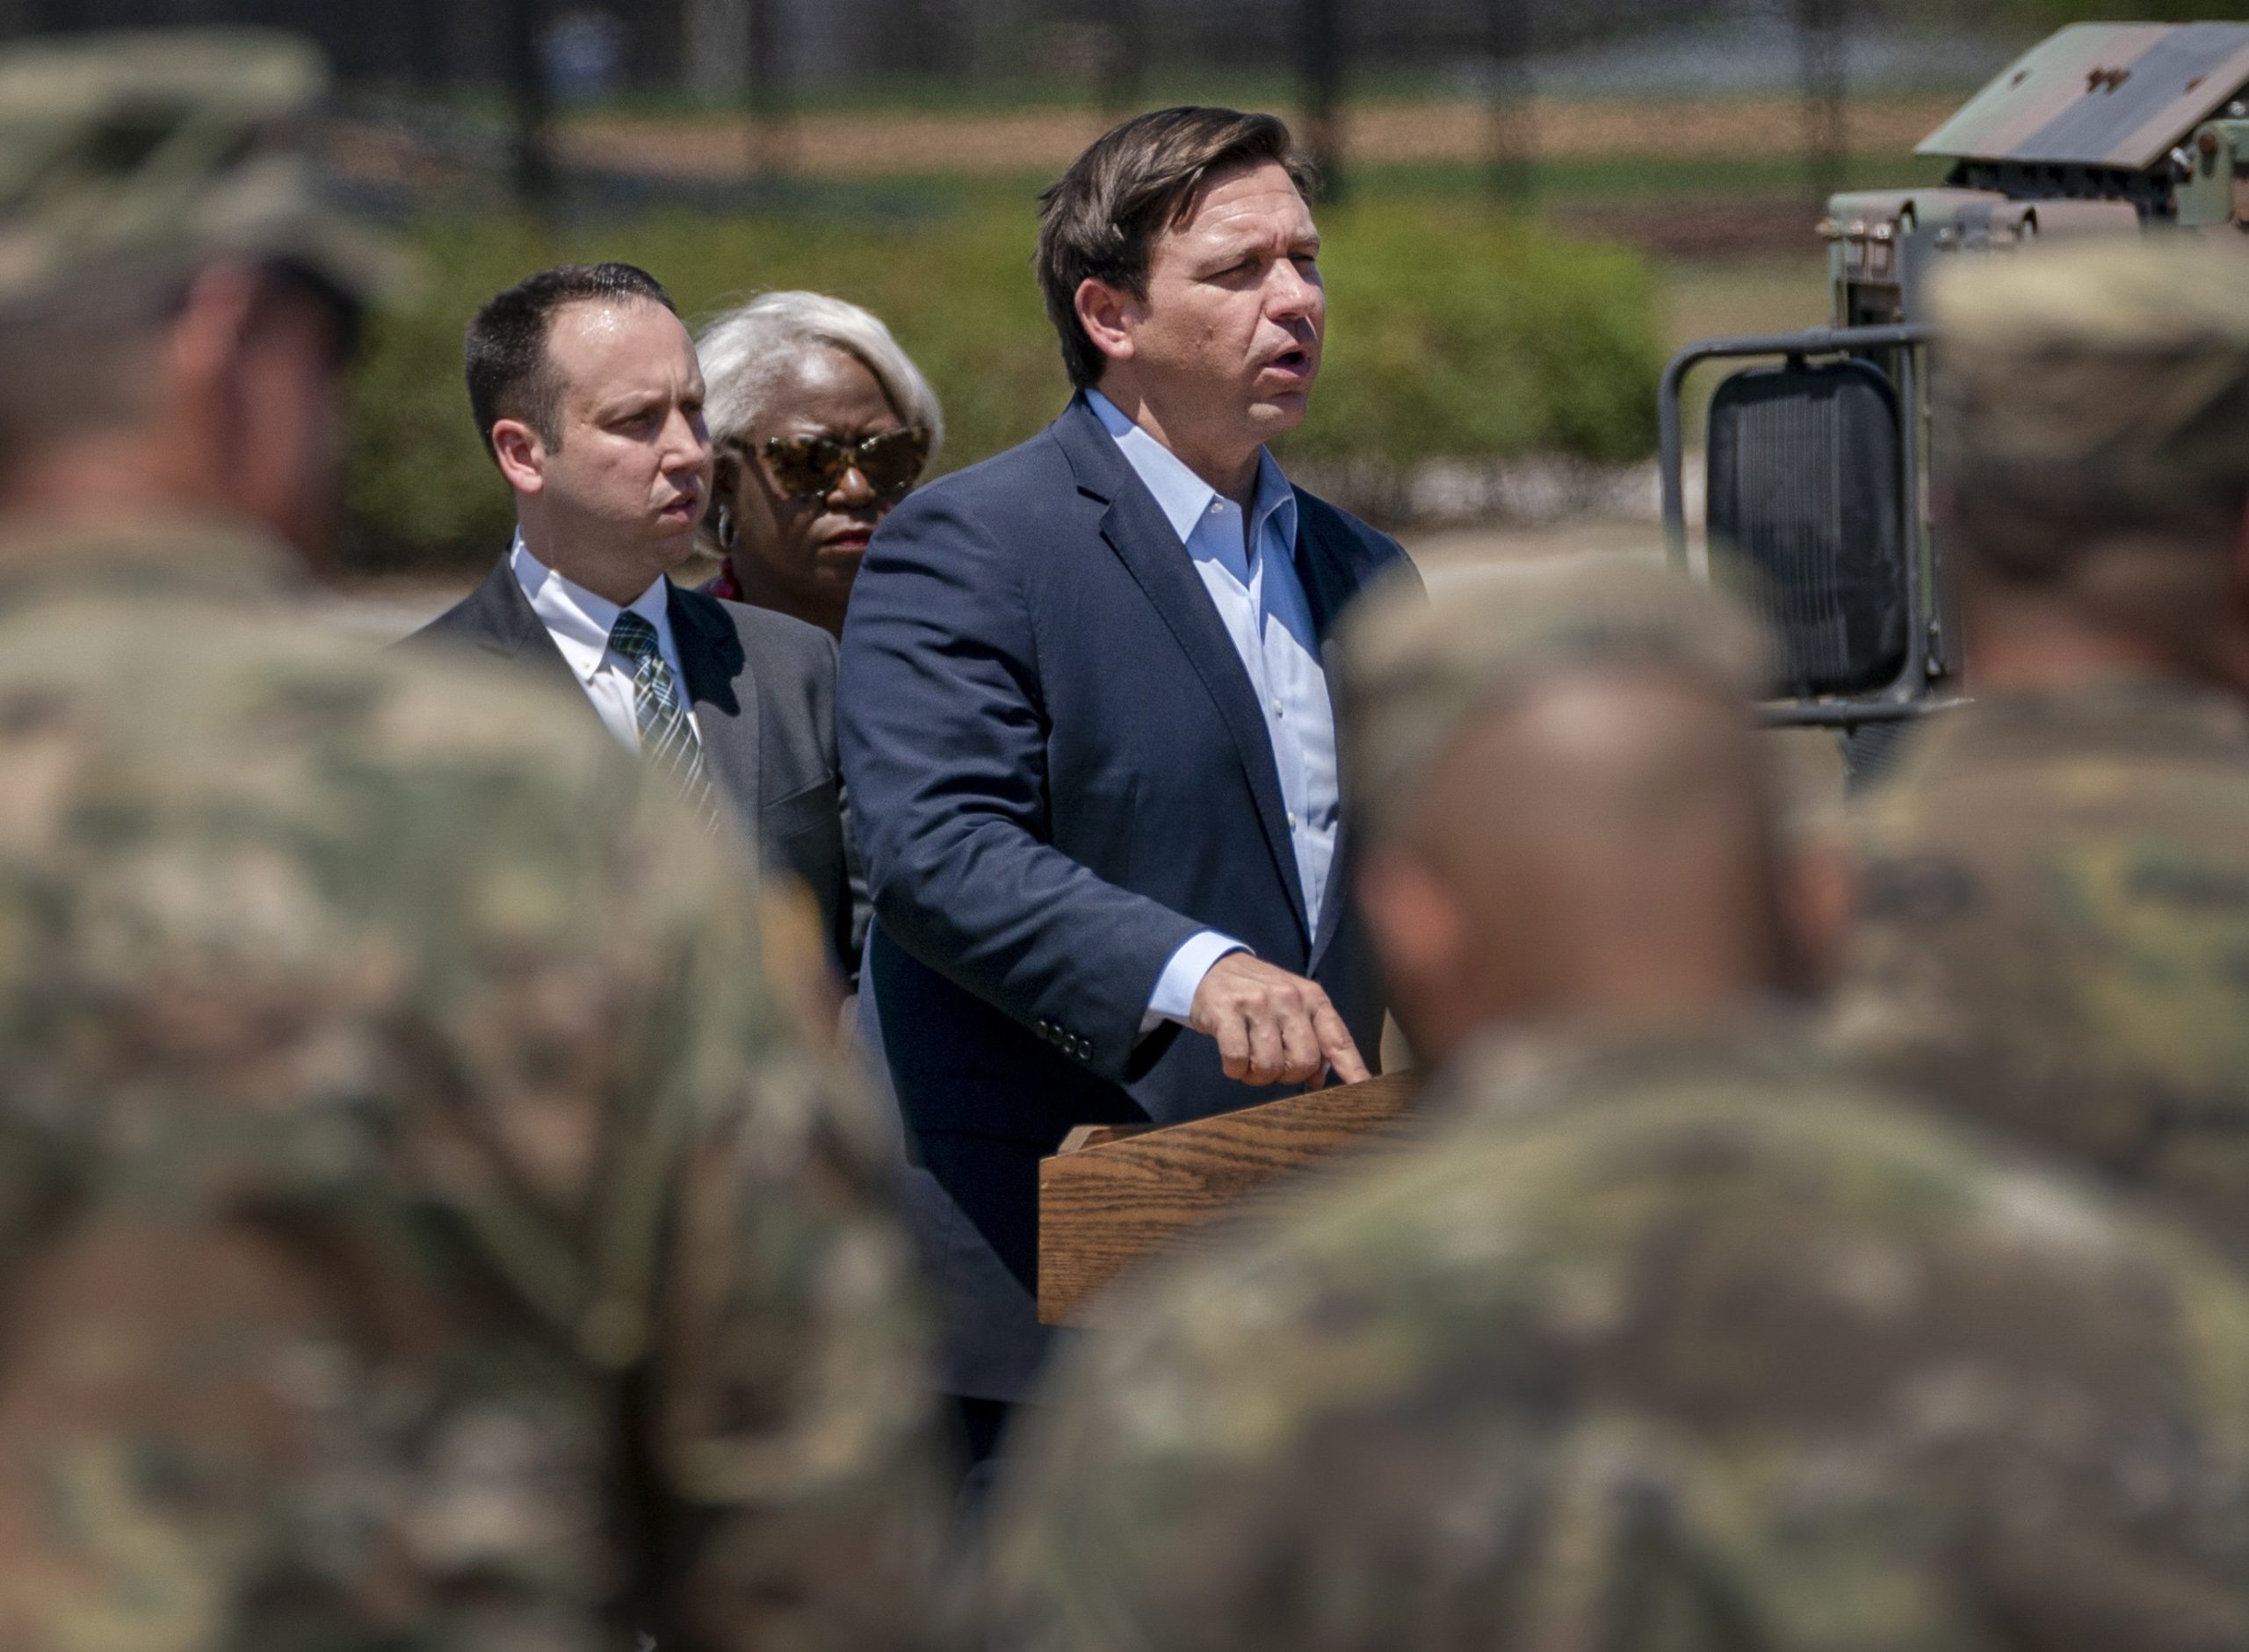 Florida Gov. Ron DeSantis speaks March 30, 2020, at a news conference with Palm Beach County Mayor Dave Kerner and County Administrator Verdenia Baker at a drive-thru COVID-19 testing facility in West Palm Beach.